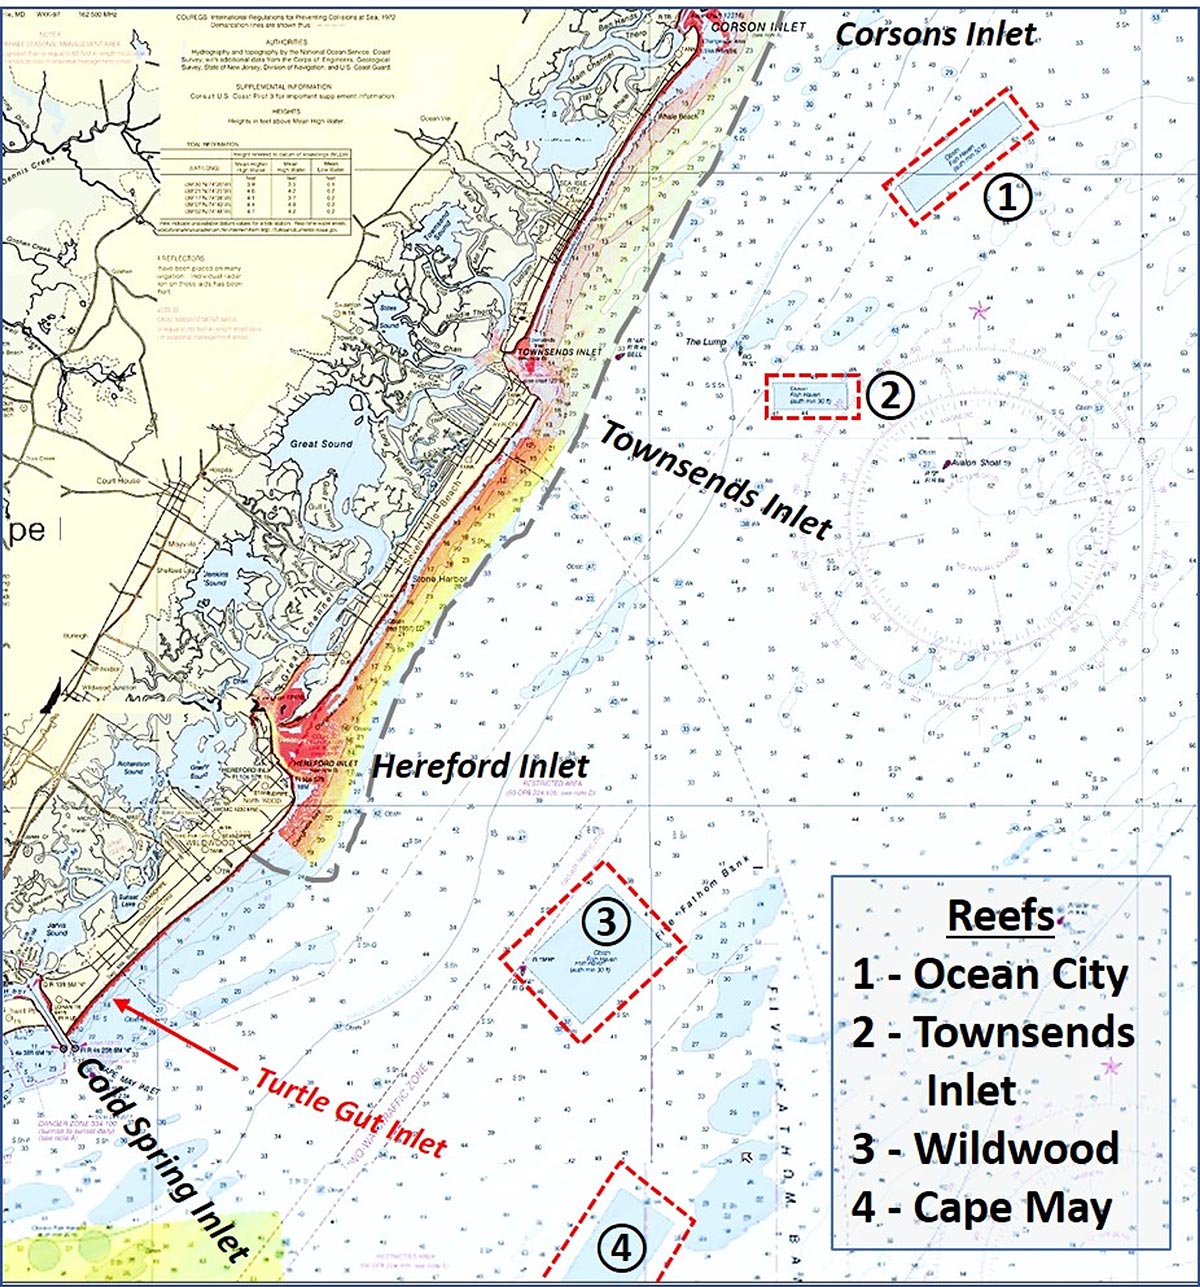 Cape May to Little Egg Fishing Spots - New Jersey Wreck Fishing spots